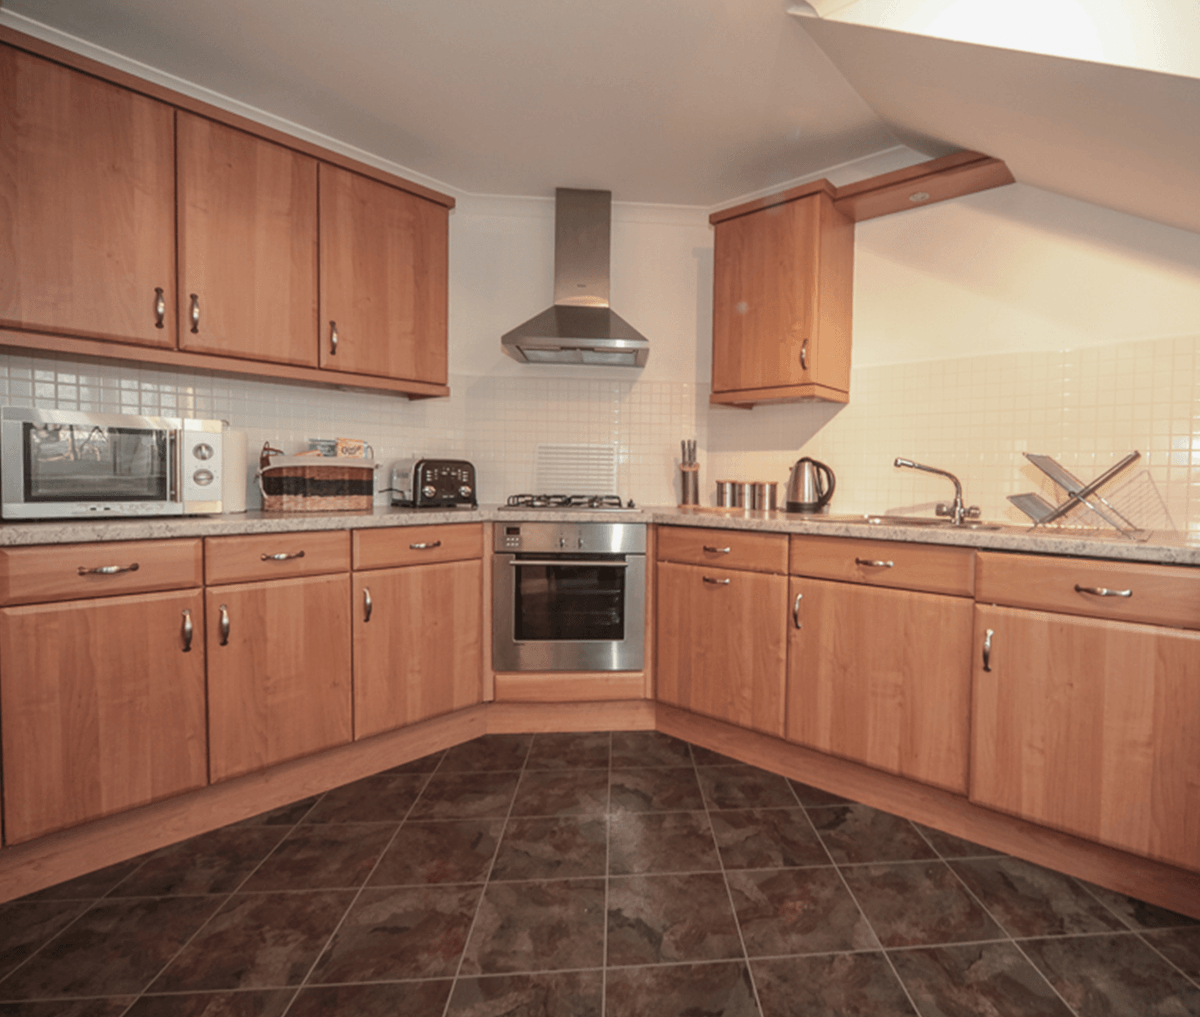 Did we say full size kitchen? Yes we did indeed! All of our serviced apartments come with fully fitted kitchens, some even with exceptionally spacious ones, just like this corporate accommodation in #Aberdeen! Book now +44 (0) 208 691 3920 #visitscotland urban-stay.co.uk/corporate-apar…